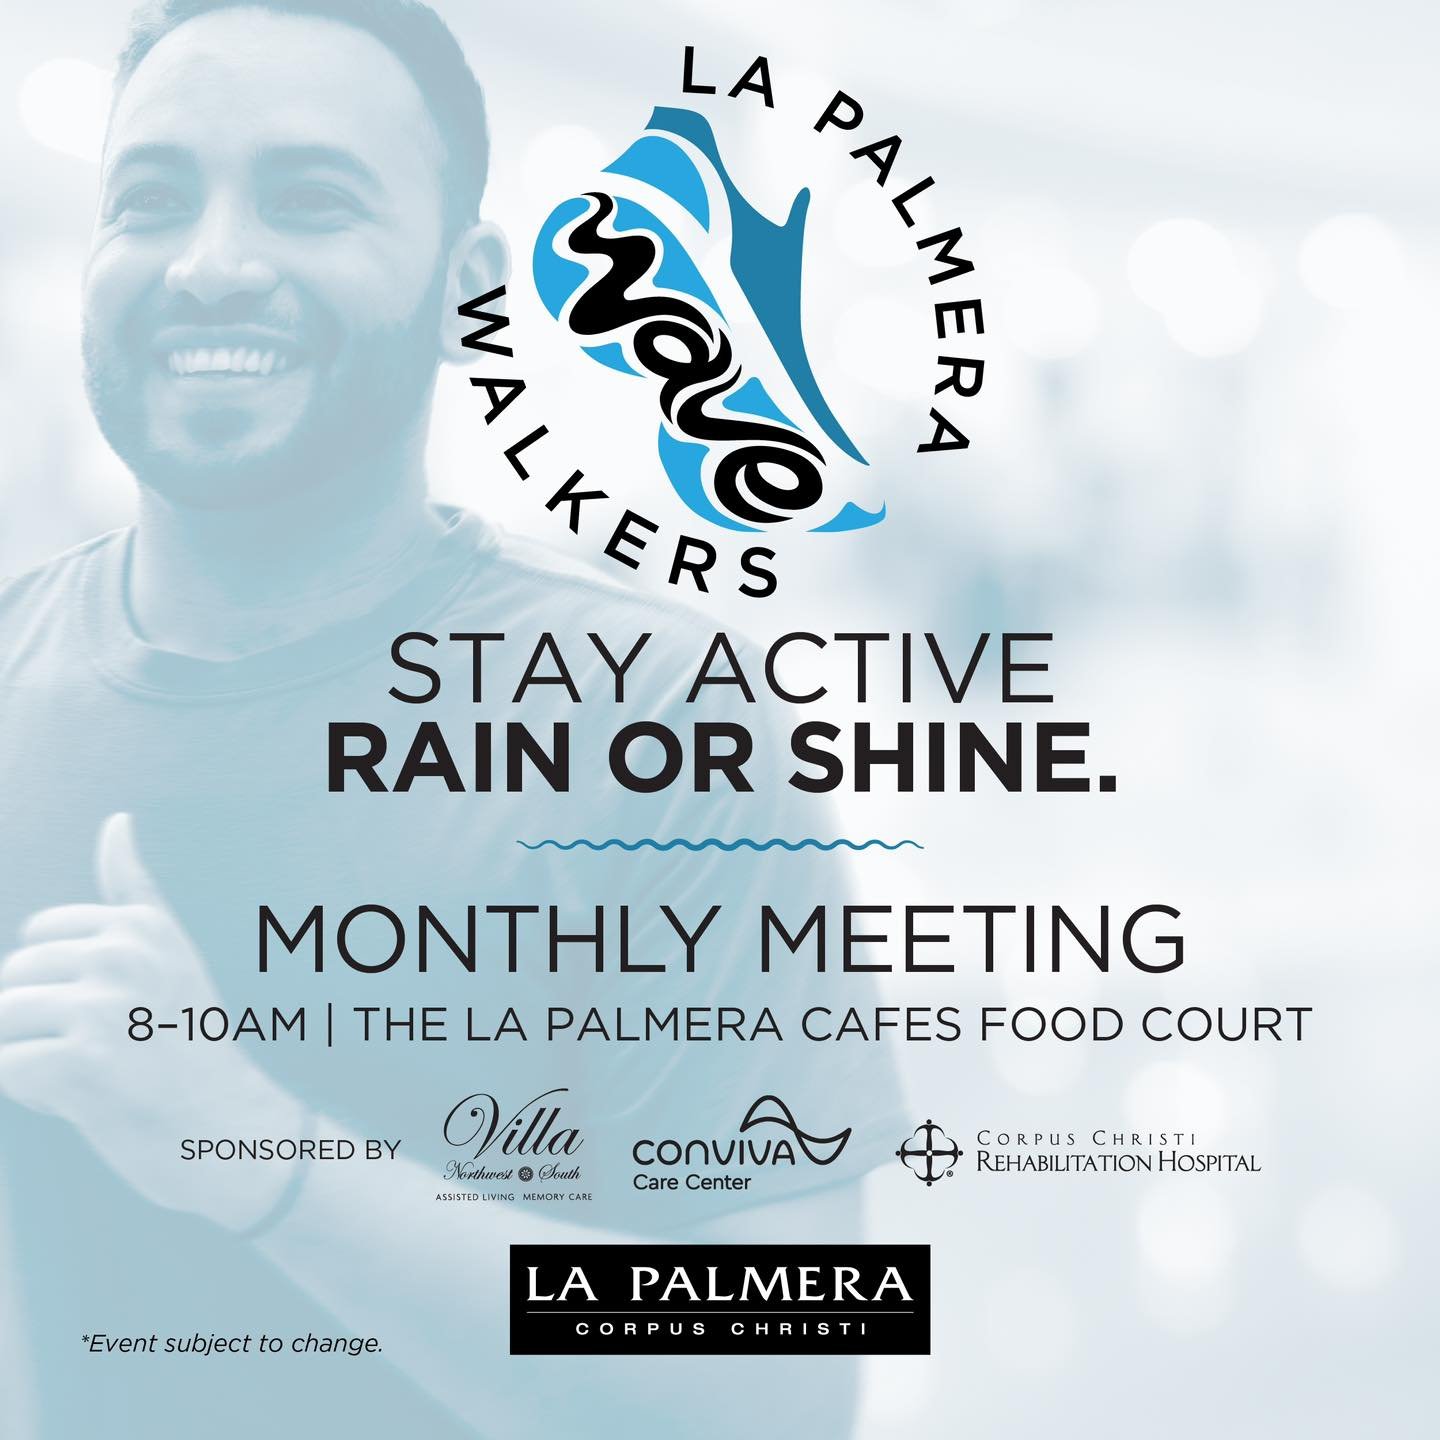 Get moving with us 👟🤸 this Tuesday at 8am in La Palmera Cafes Food Court for our FREE monthly Wave Walkers event! Exercise your mind and body with bingo and Zumba. Available for all ages and fitness levels.